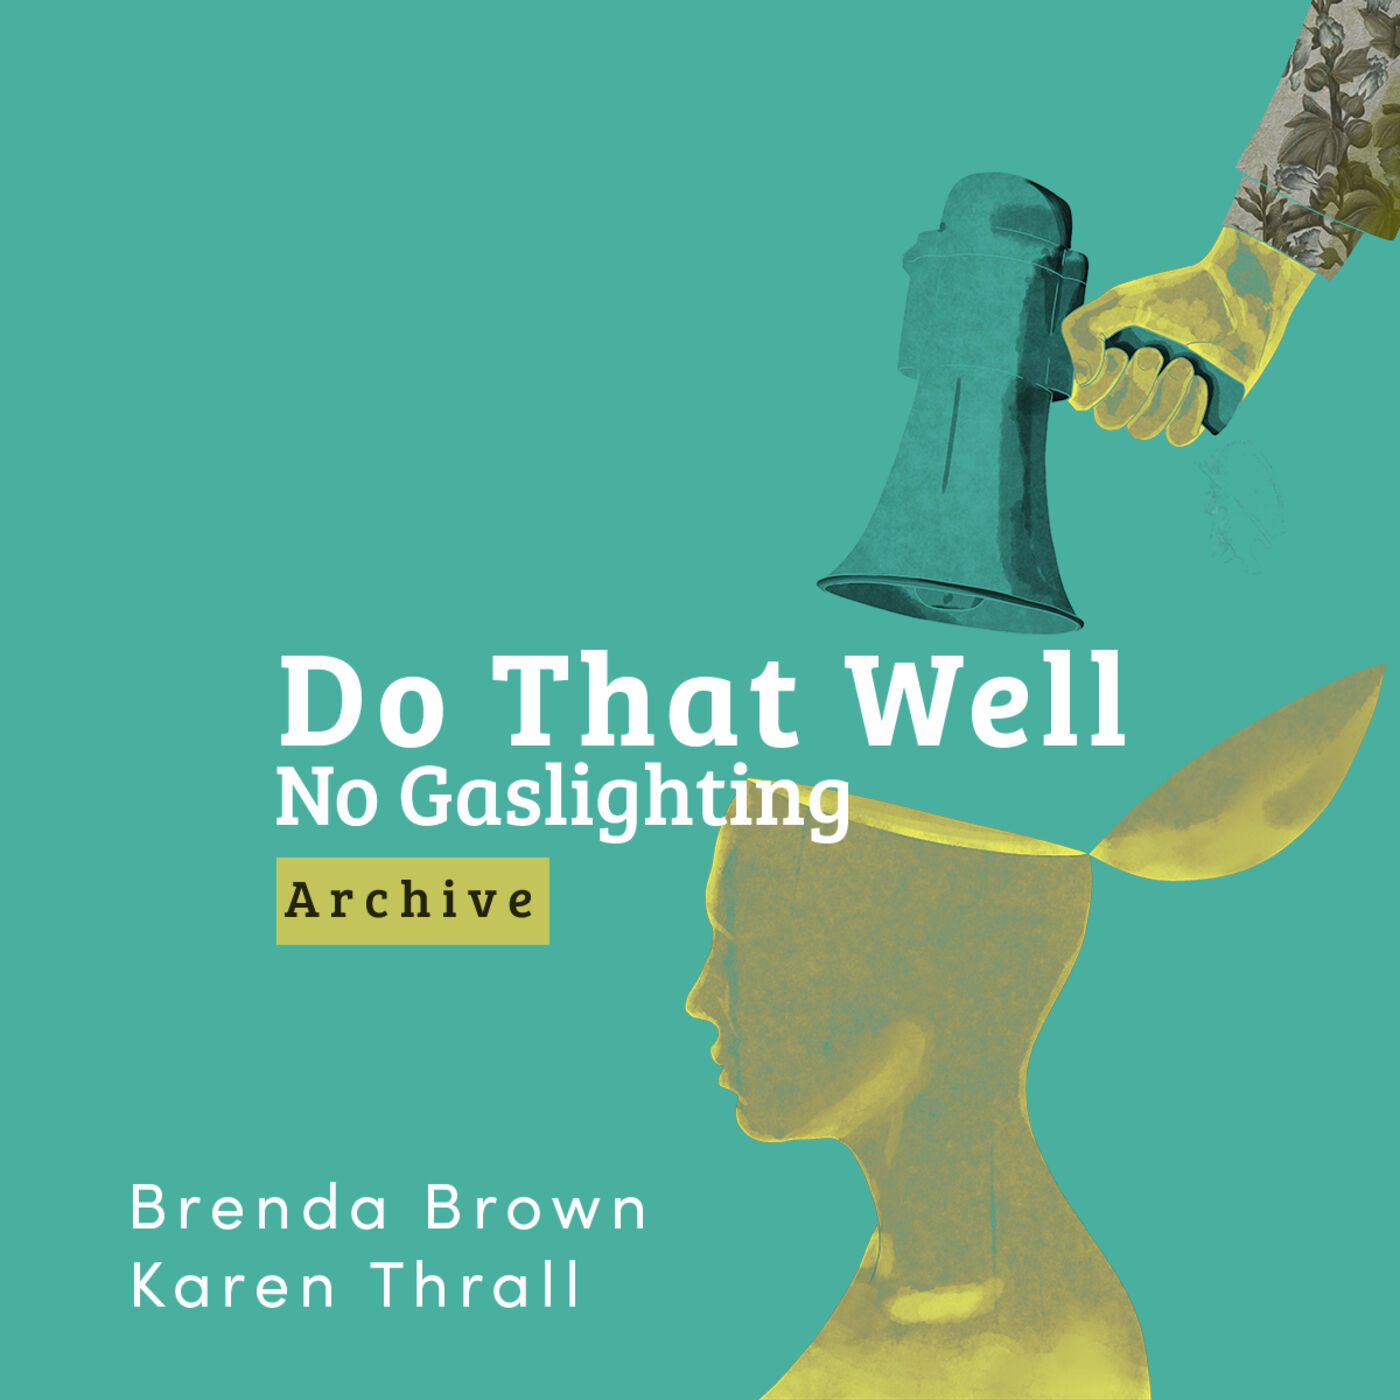 [archive] Do That Well:  No Gaslighting